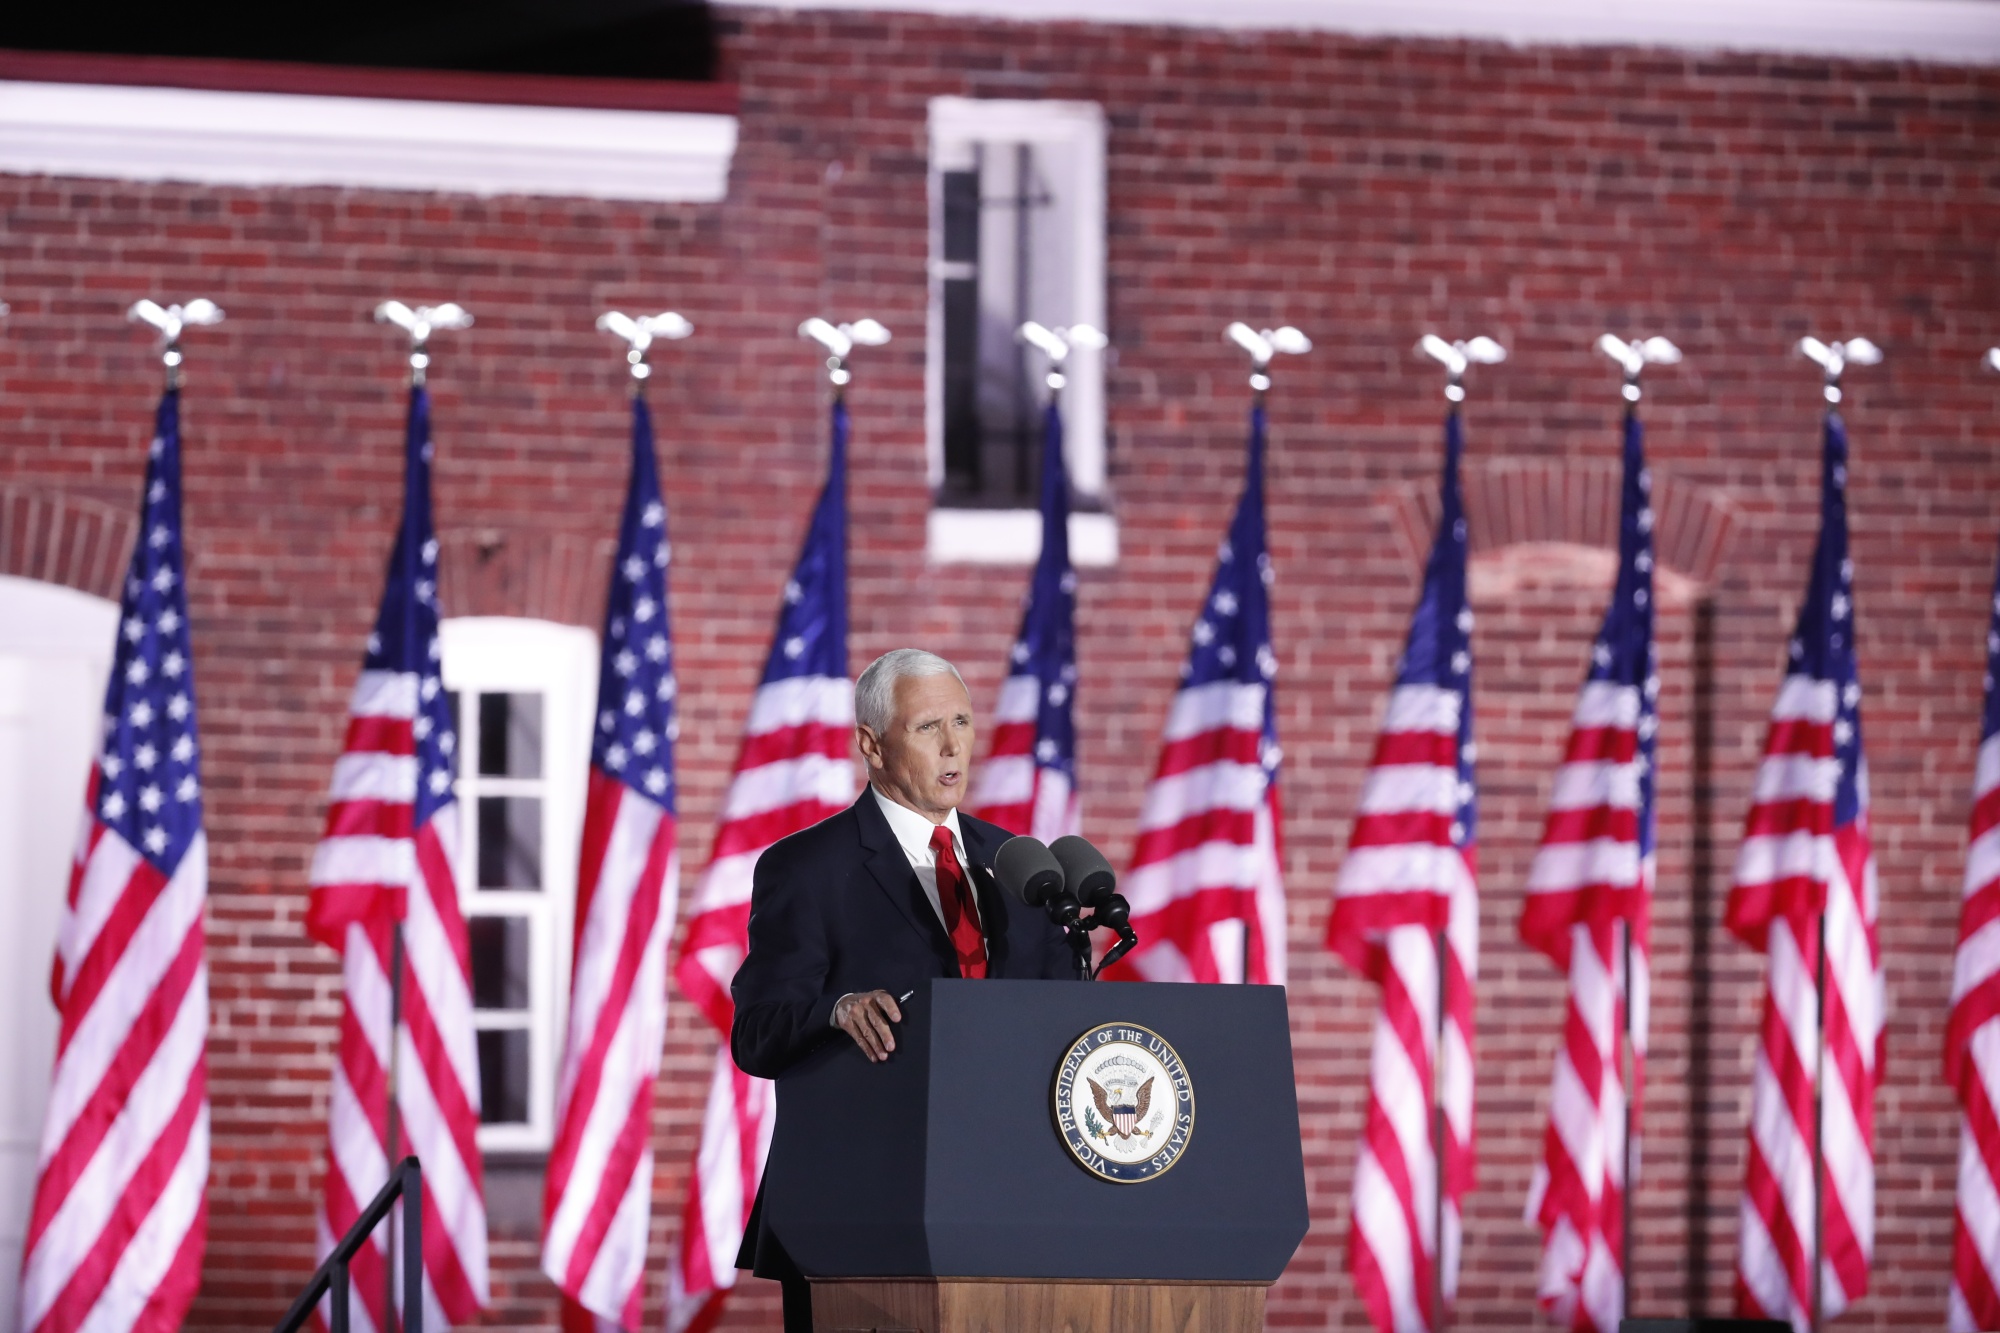 Mike Pence speaks during the Republican National Convention at Fort McHenry National Monument and Historic Shrine in Baltimore, Maryland, U.S., on Aug. 26.